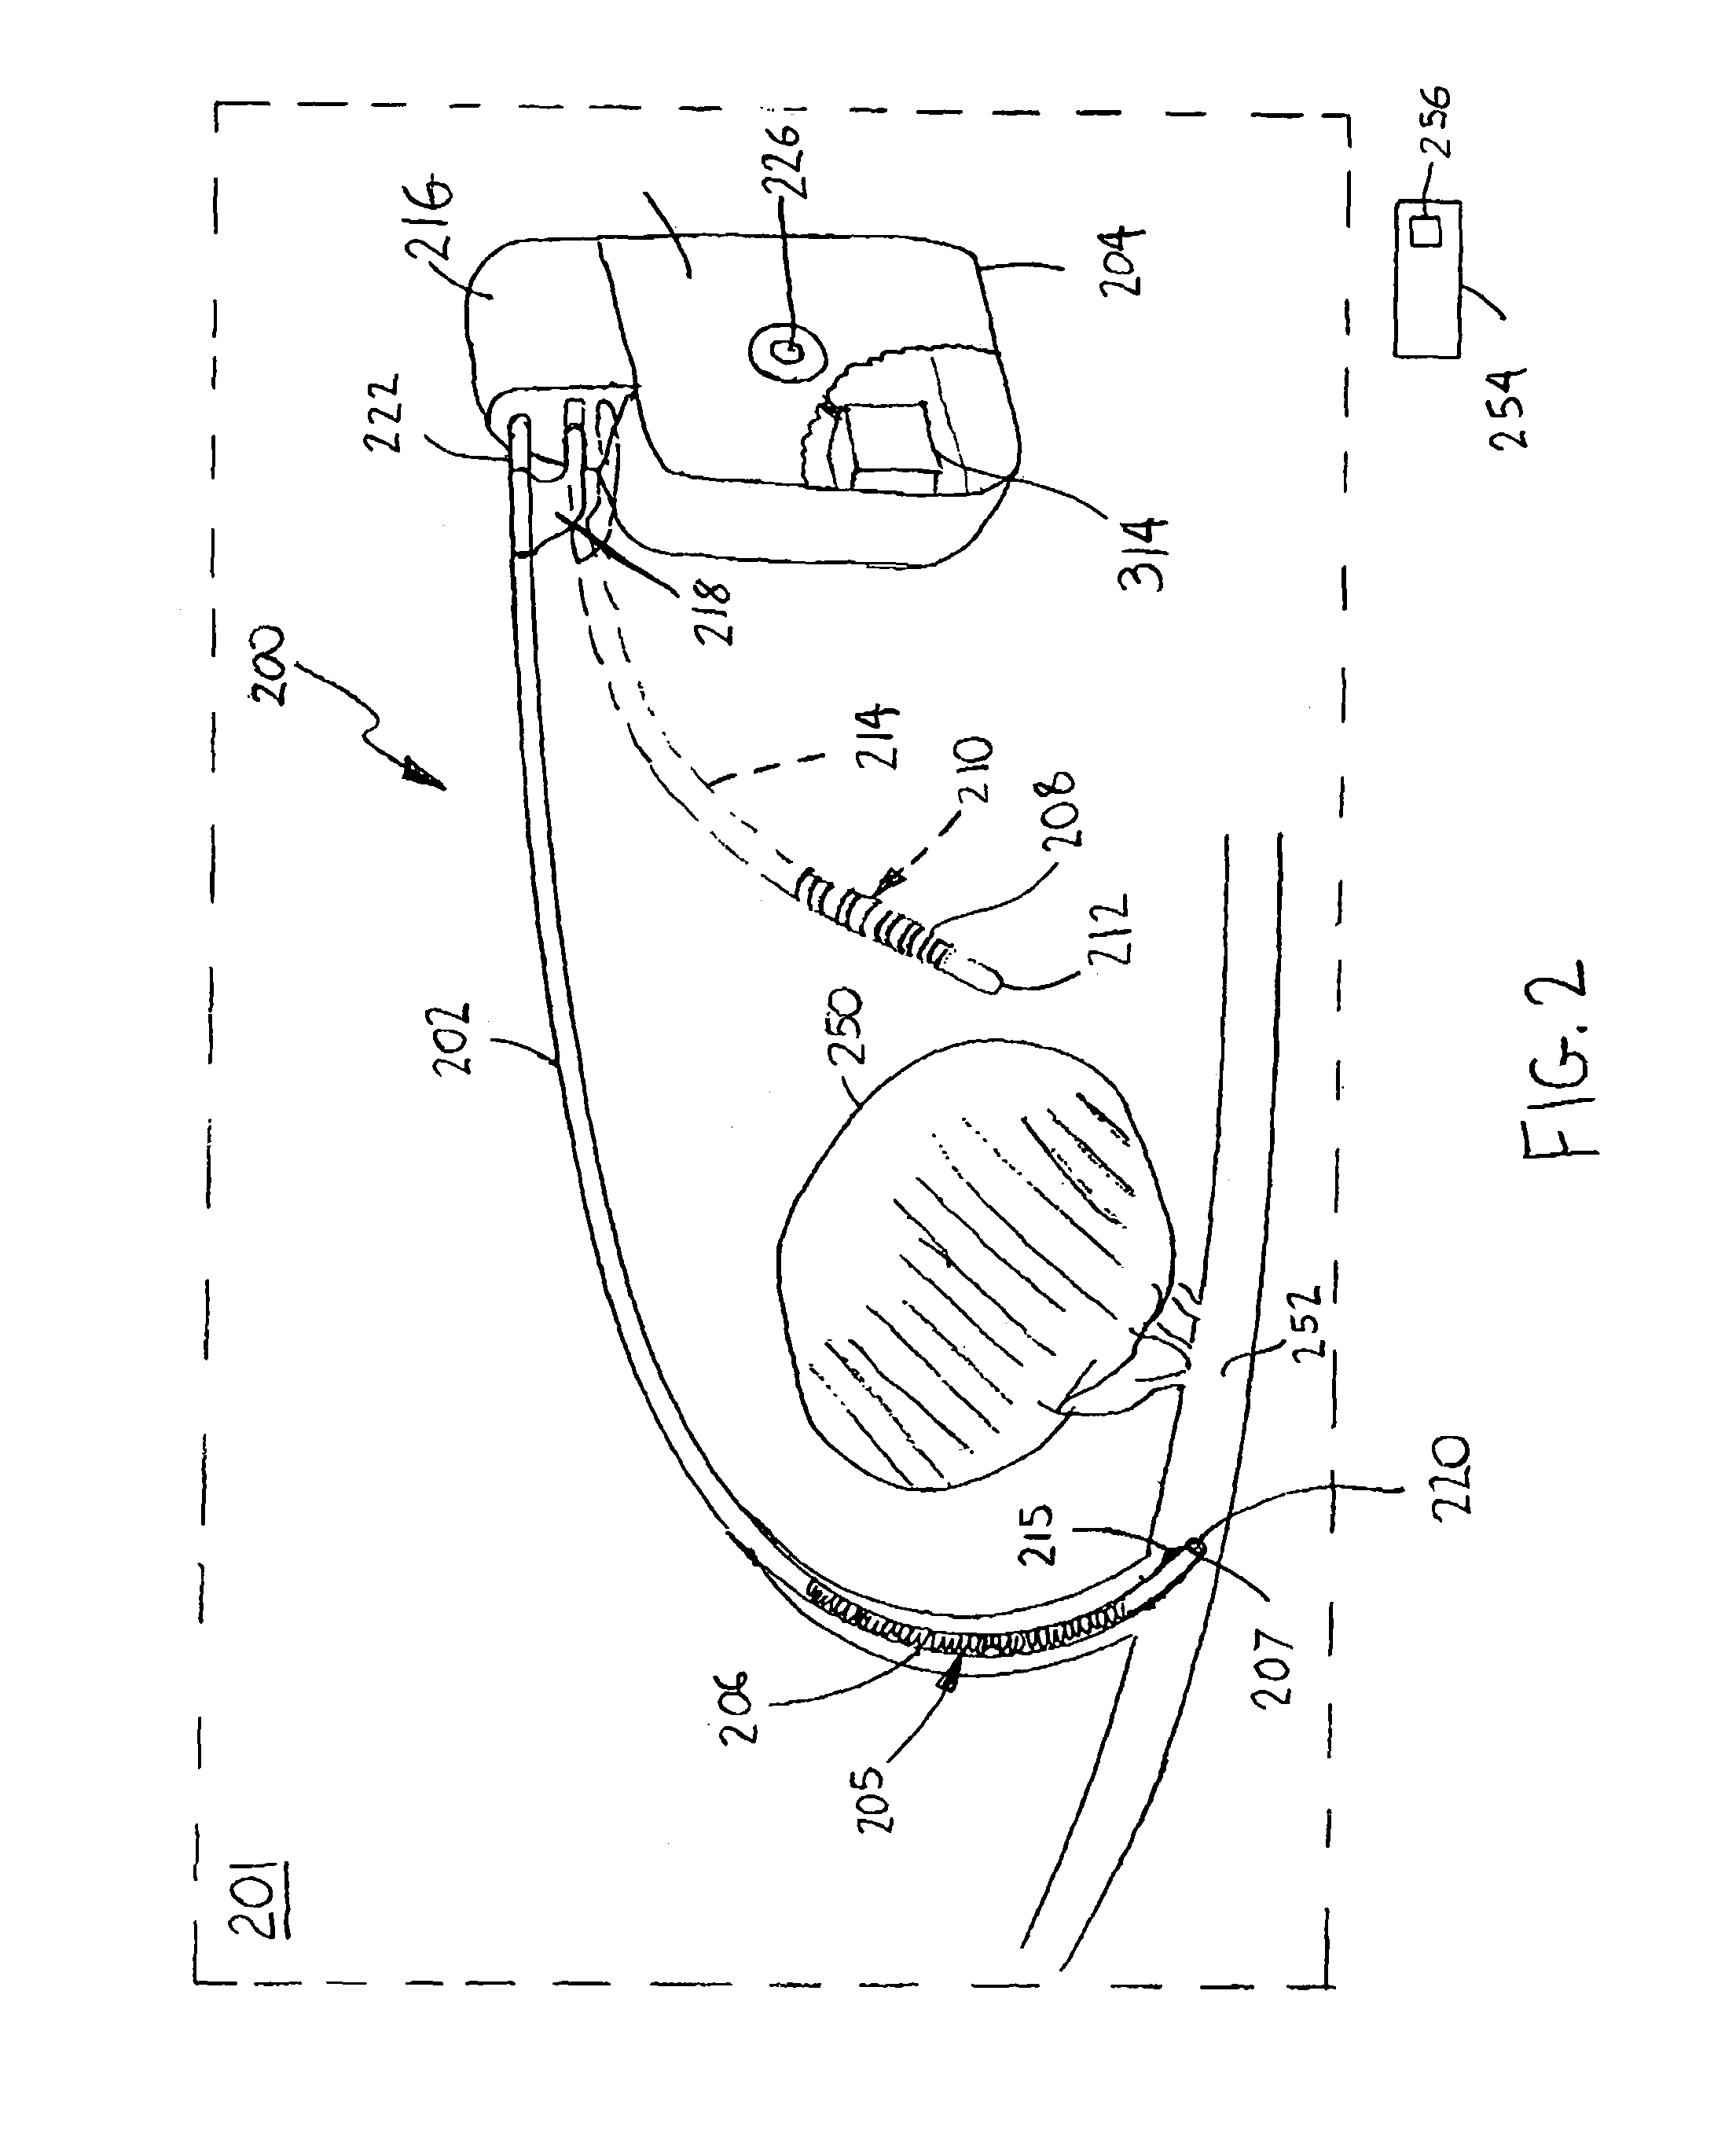 Implantable electroporation therapy device and method for using same